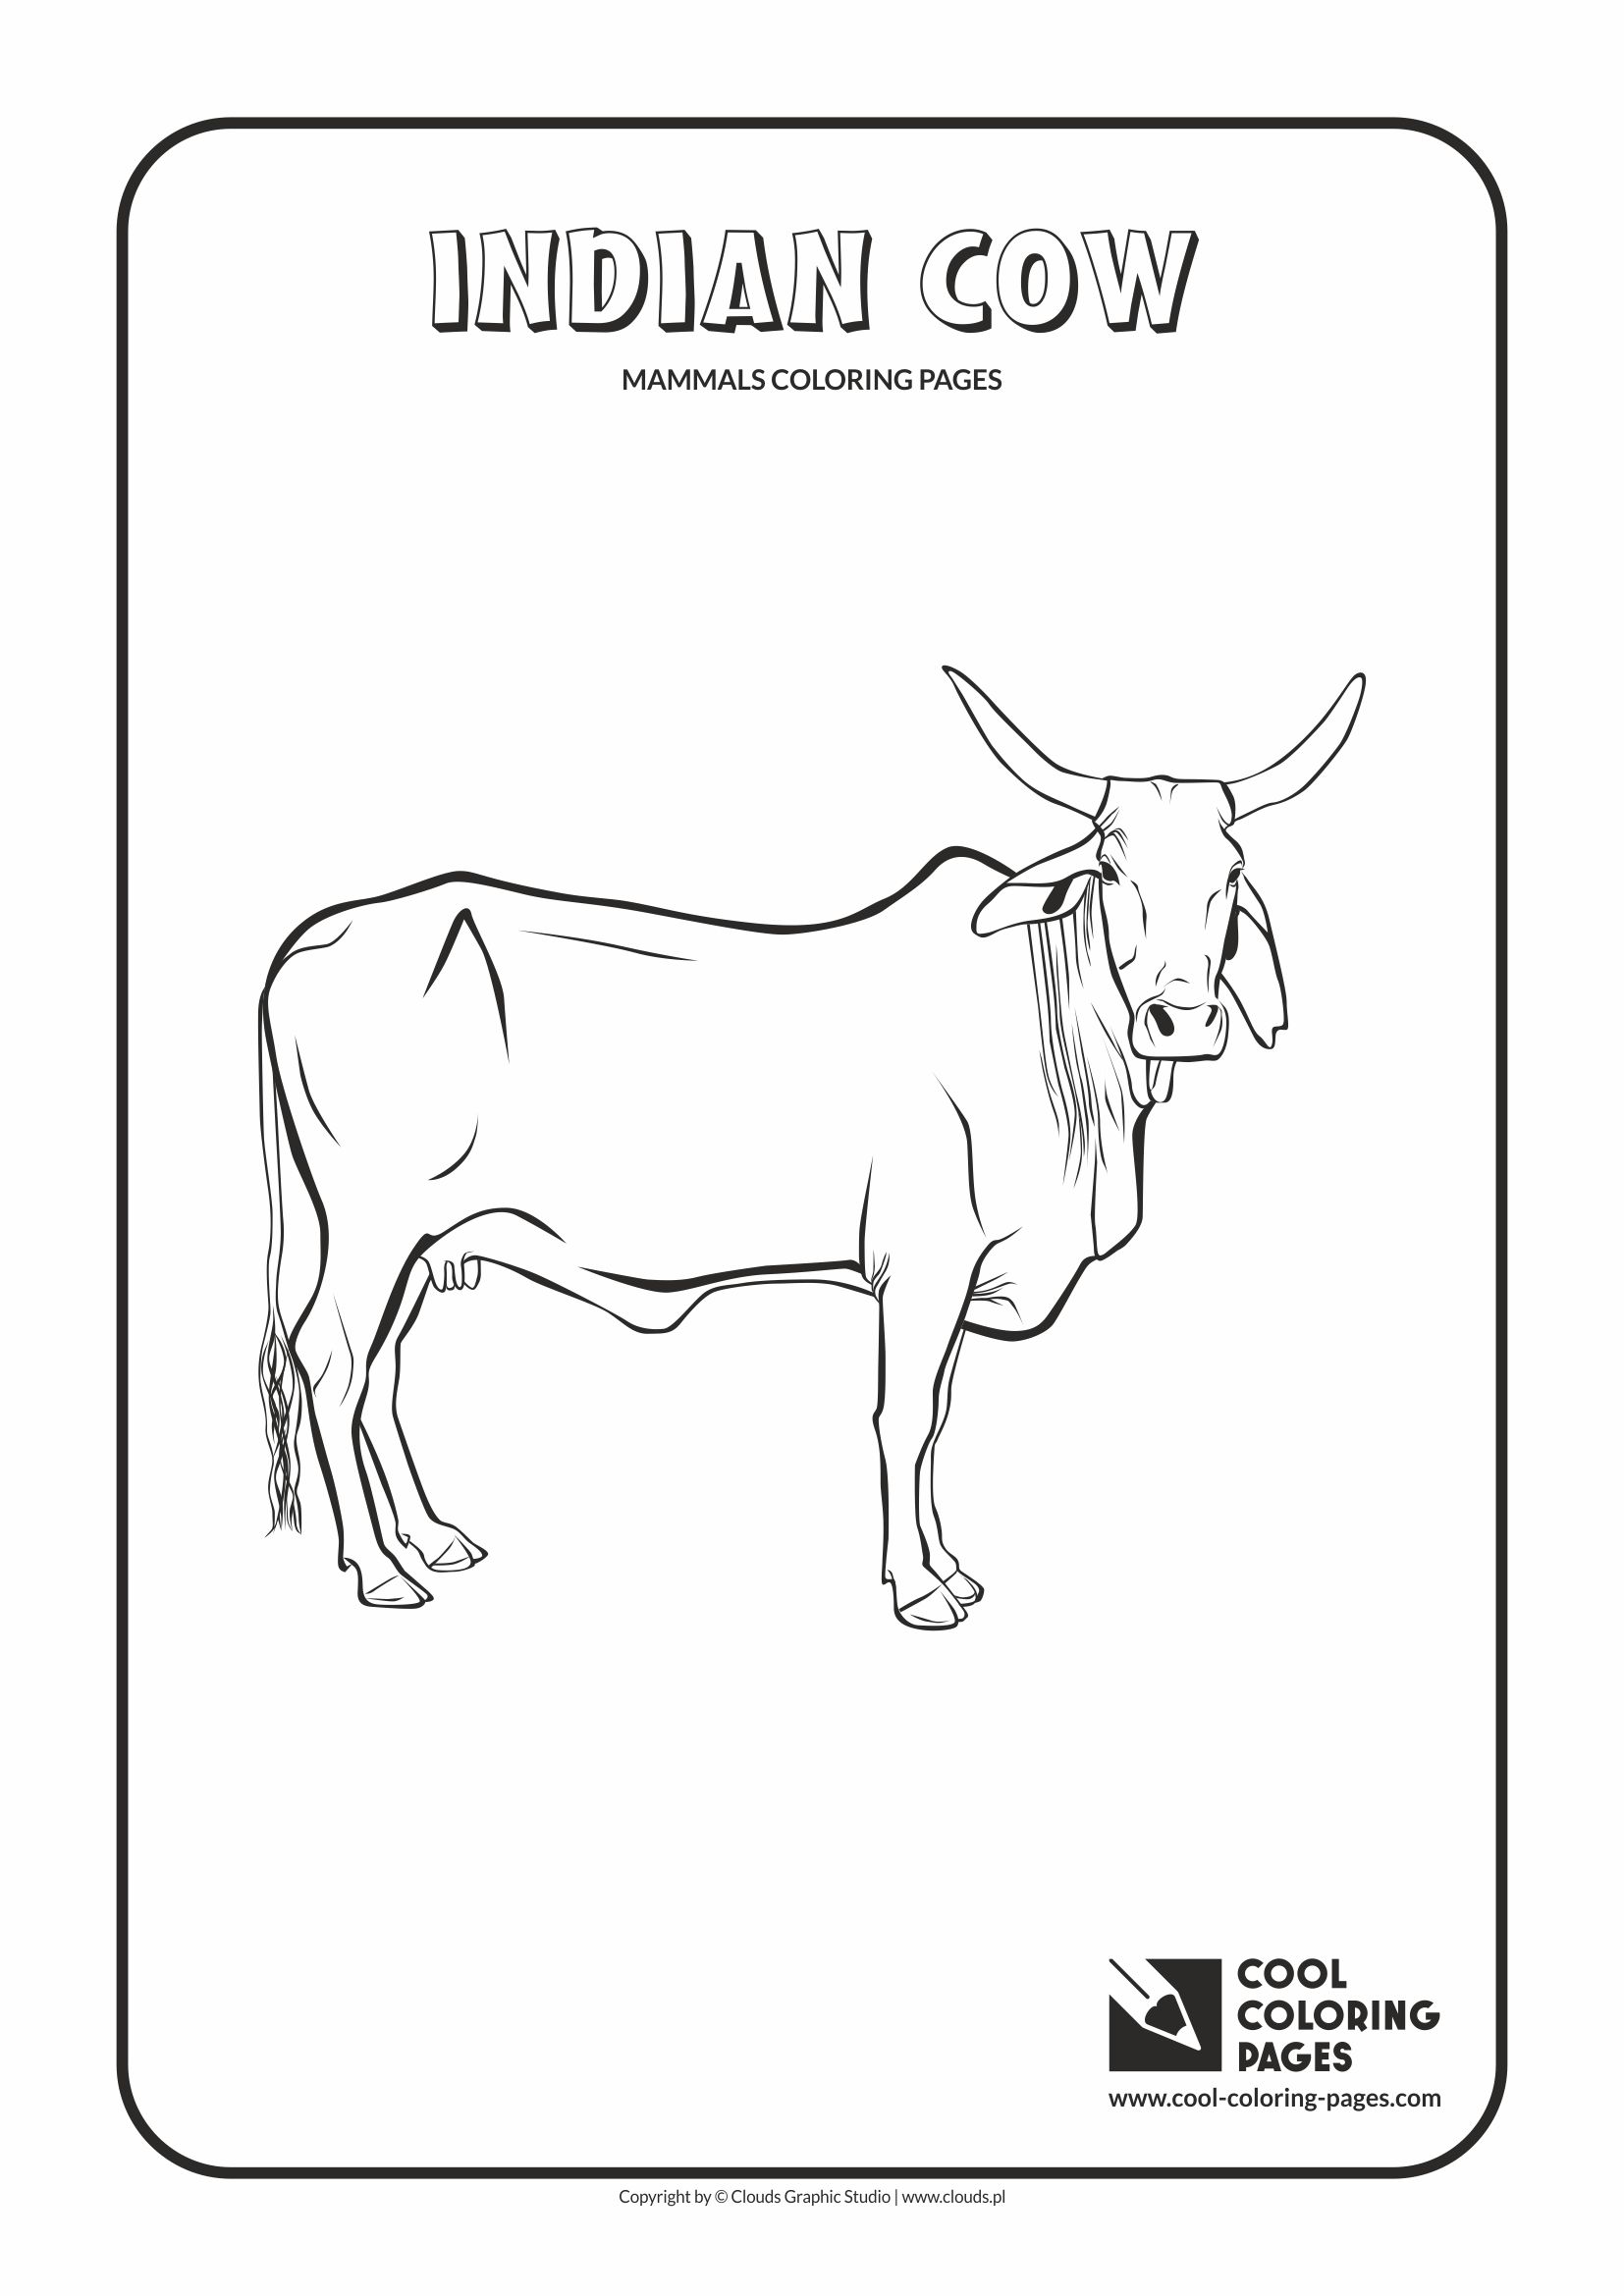 Cool Coloring Pages - Animals / Indian cow / Coloring page with indian cow